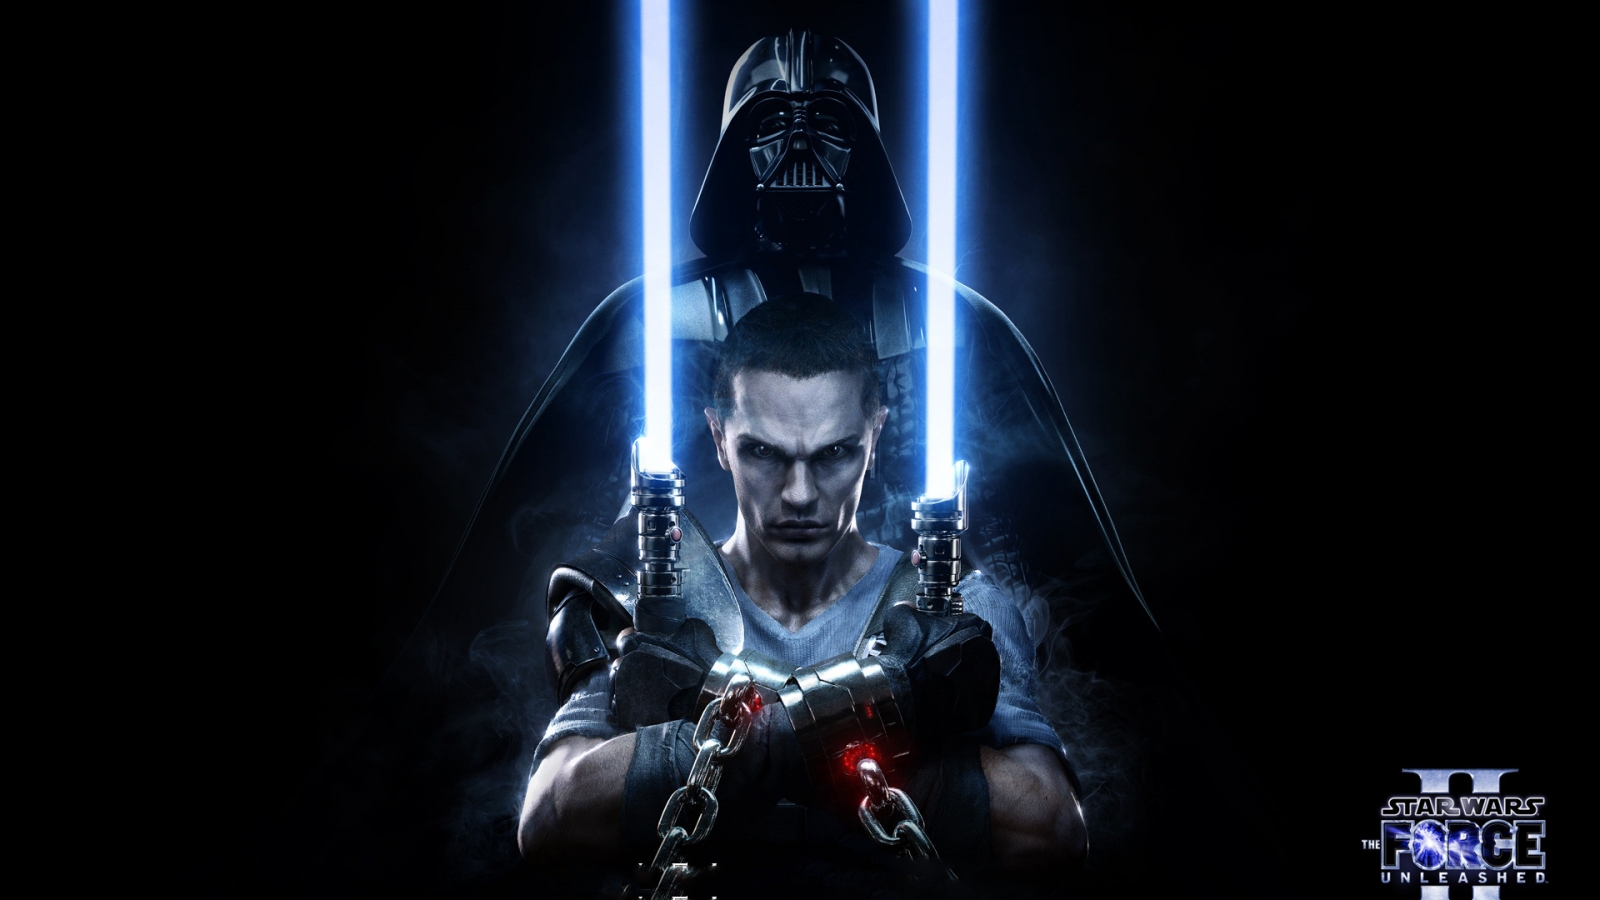 Star Wars The force Unleashed 2 Poster for 1600 x 900 HDTV resolution